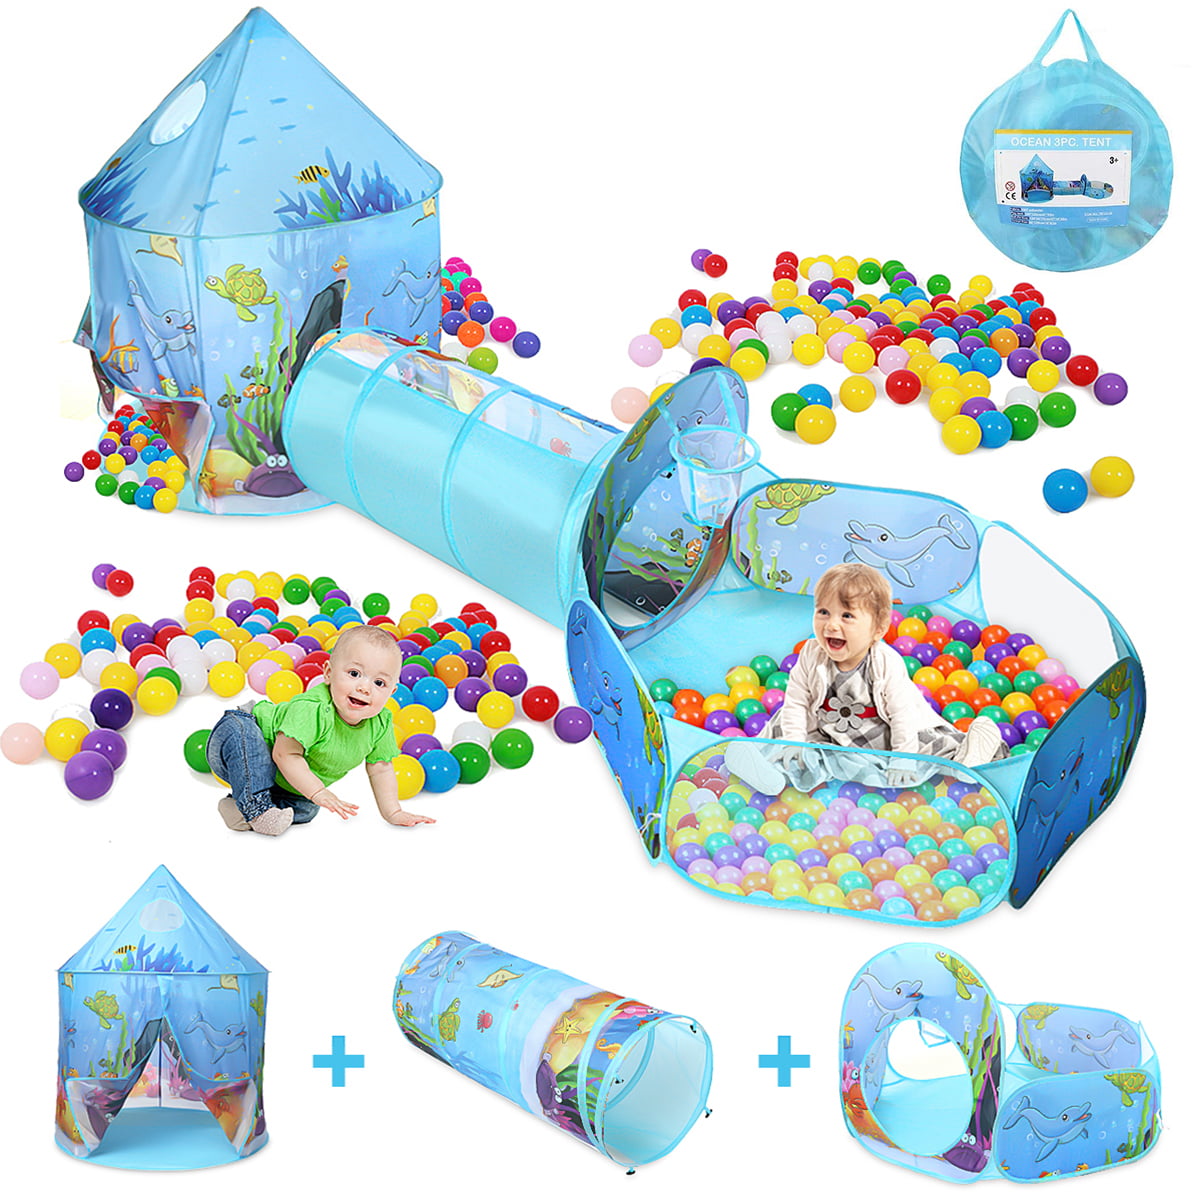 3 in 1 OCEAN KIDS BABY PLAY TENT POP UP PLAYHOUSE Portable BABY TUNNEL BALL PIT 